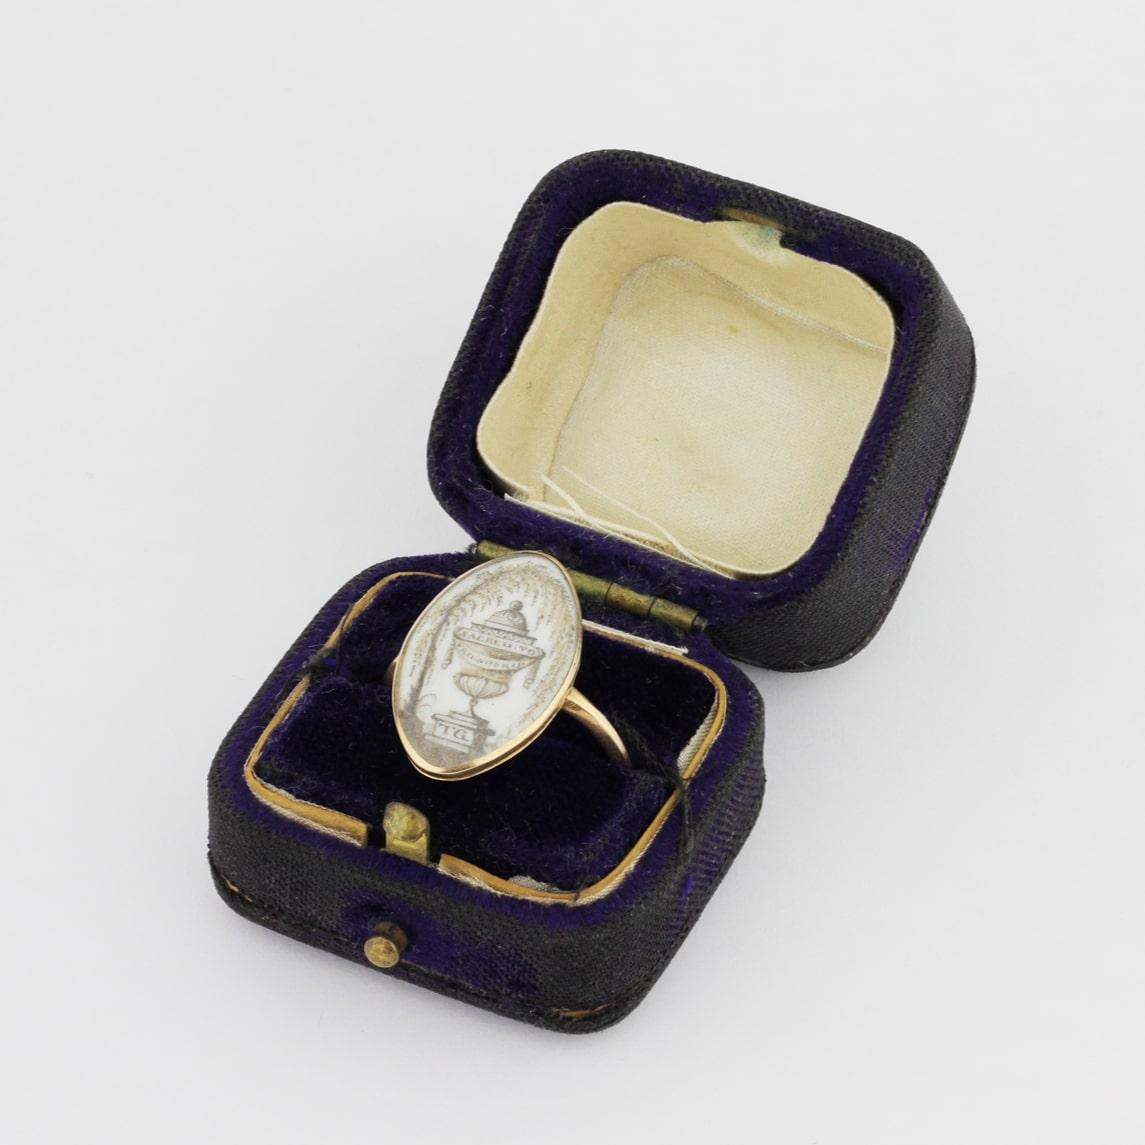 A George II mourning ring in its original box dating to 1781. To the rear is an inscription indicating it was in remembrance of Thomas Grimsby, a young sea captain. To the front is a hand painted urn with the initials 'TG', under what is likely an